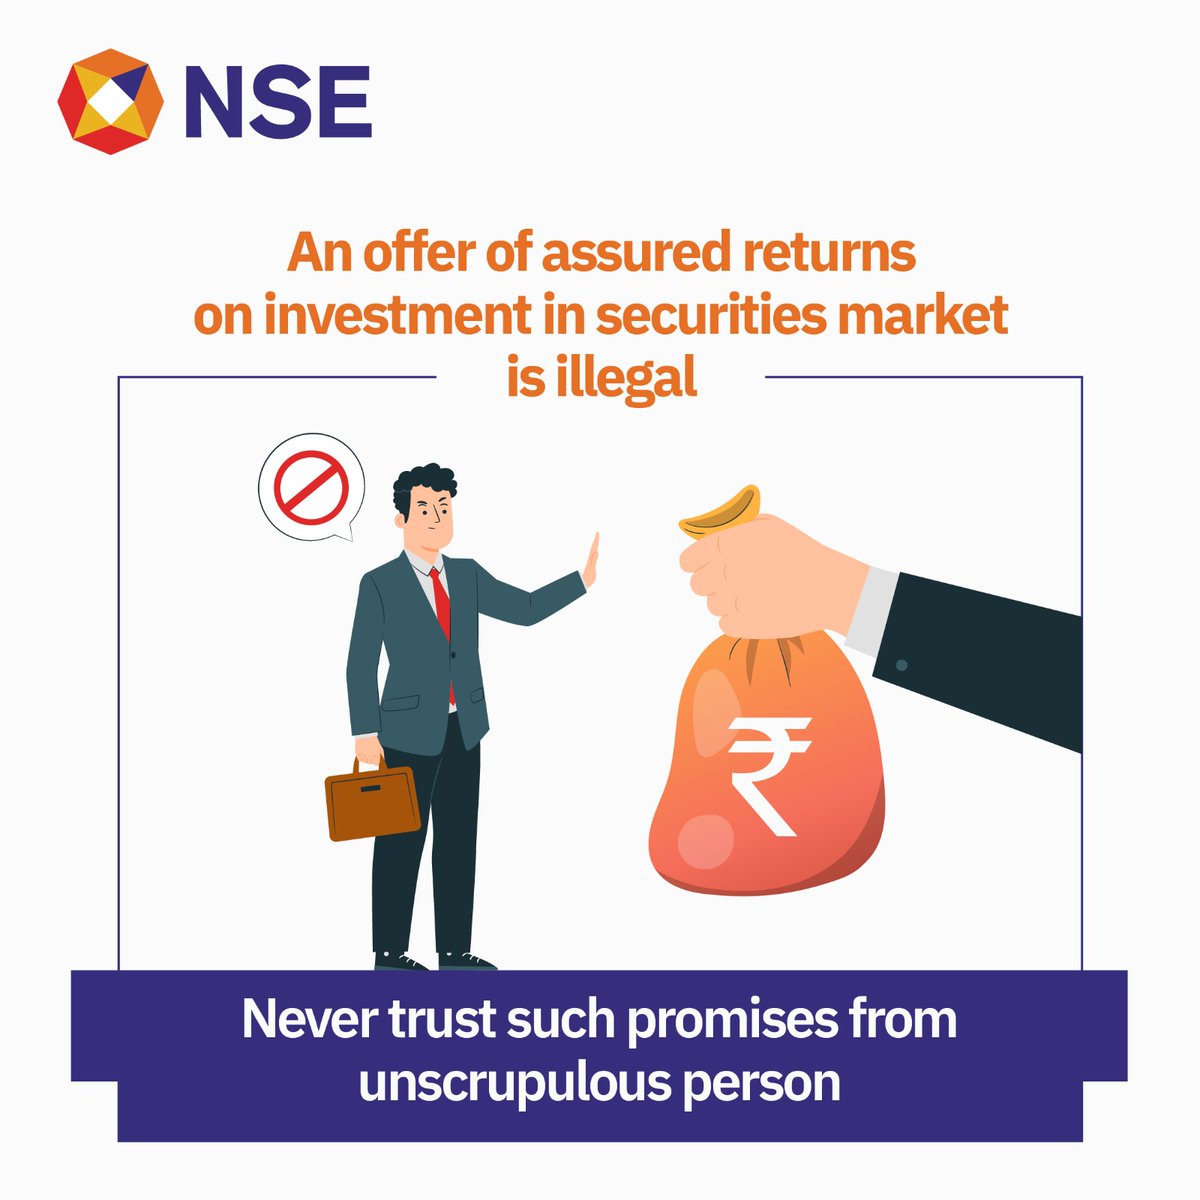 Unscrupulous persons/entities offer promises of assured returns on your investment. Stay vigilant and never invest in such schemes. #NSE #NSEIndia #InvestorProtection #InvestorAwareness @ashishchauhan